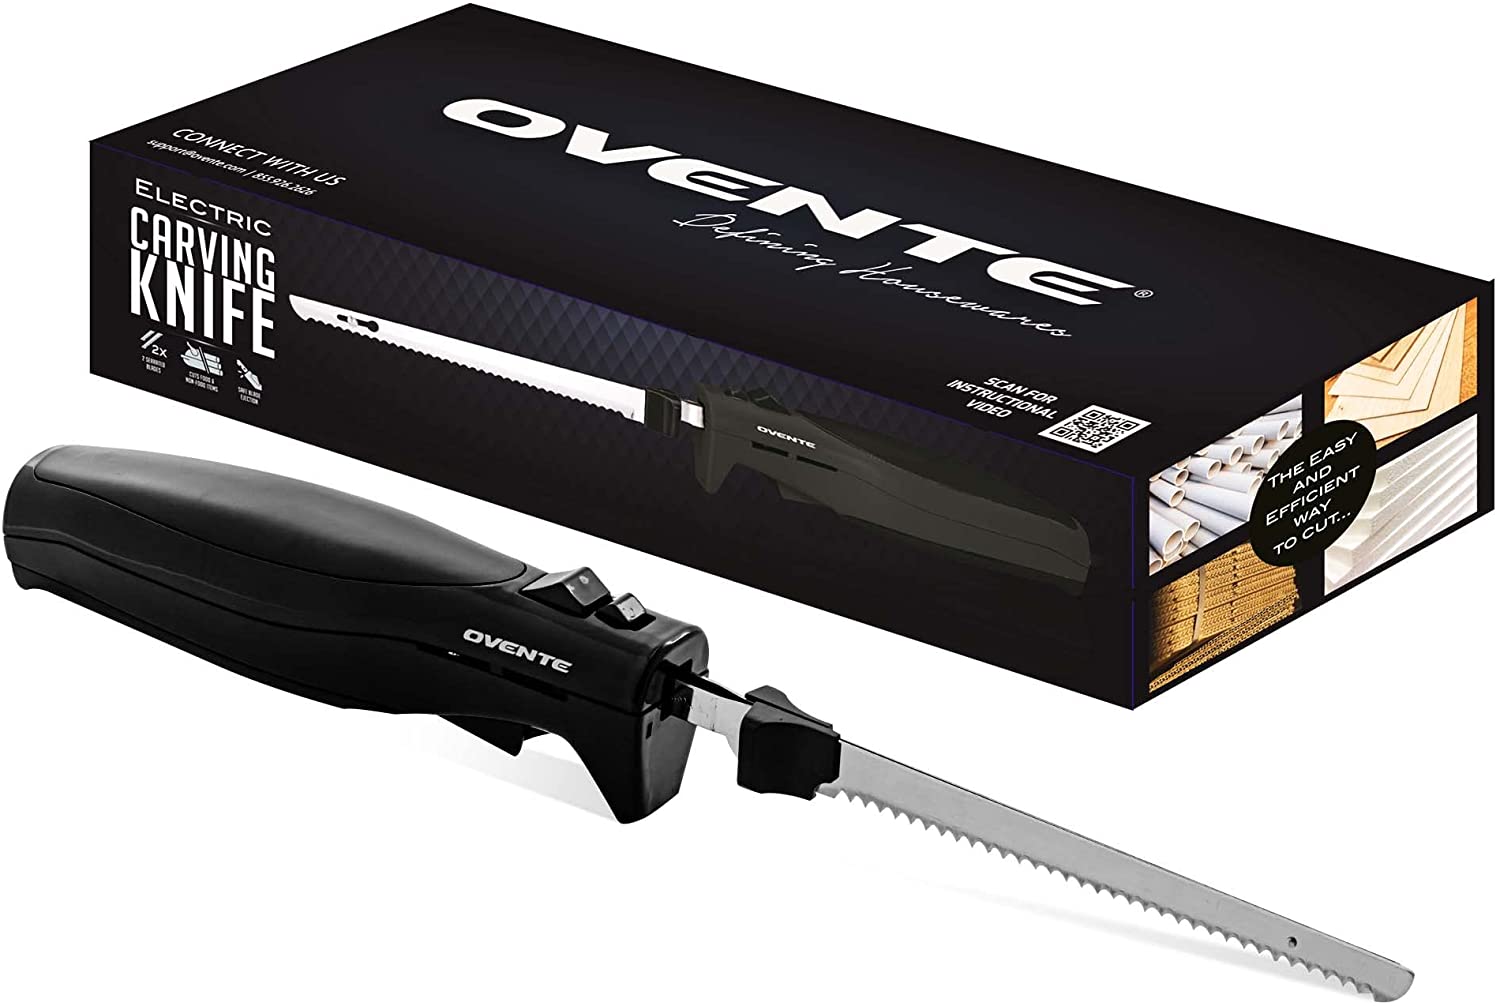 Ovente Easy Slice Automatic Electric Knife with Stainless Steel Sharp Blade & Safe Eject Button Black EK4510BB